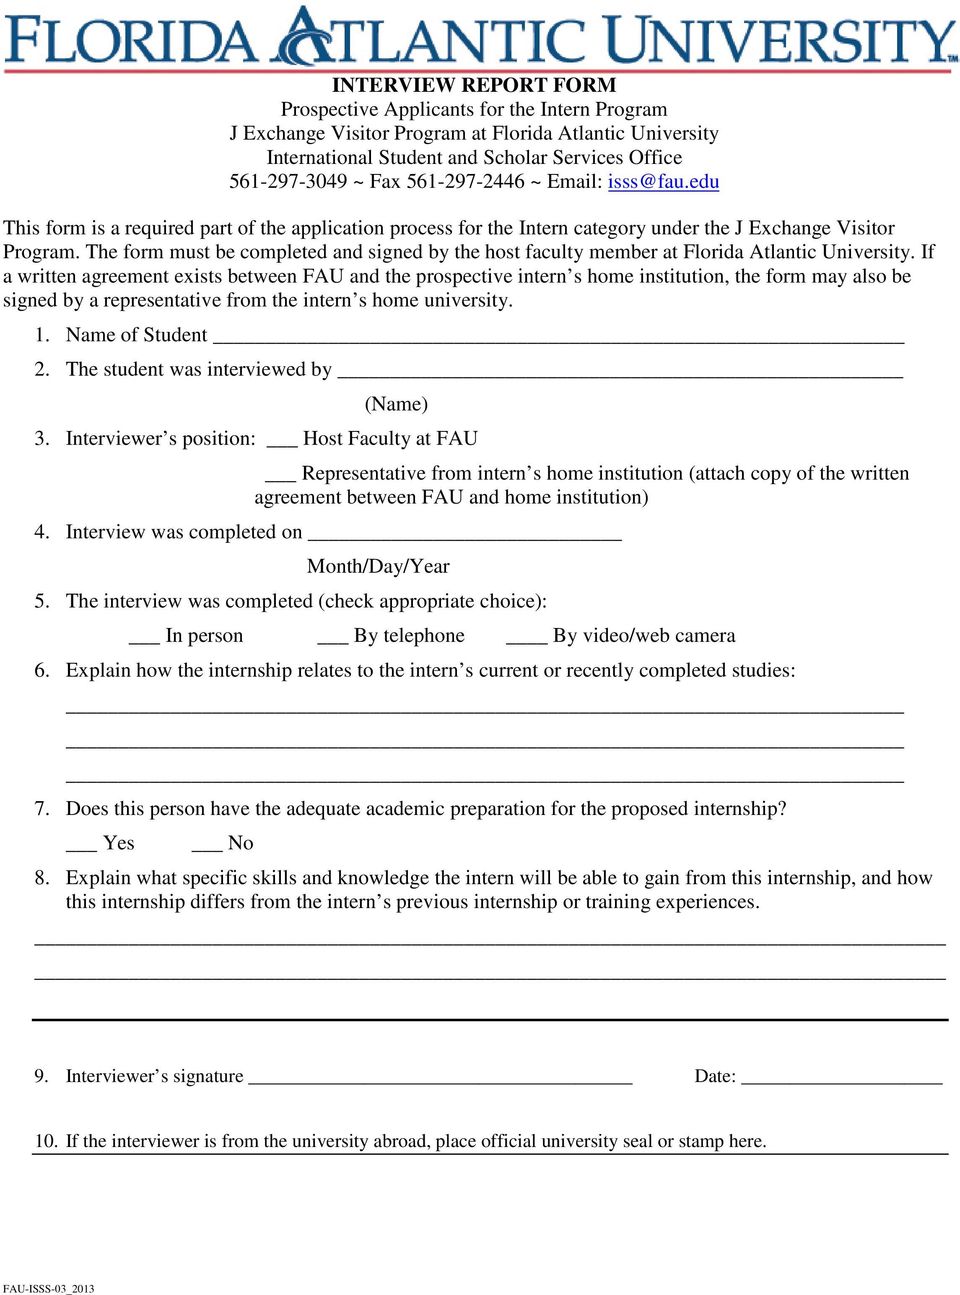 The form must be completed and signed by the host faculty member at Florida Atlantic University.